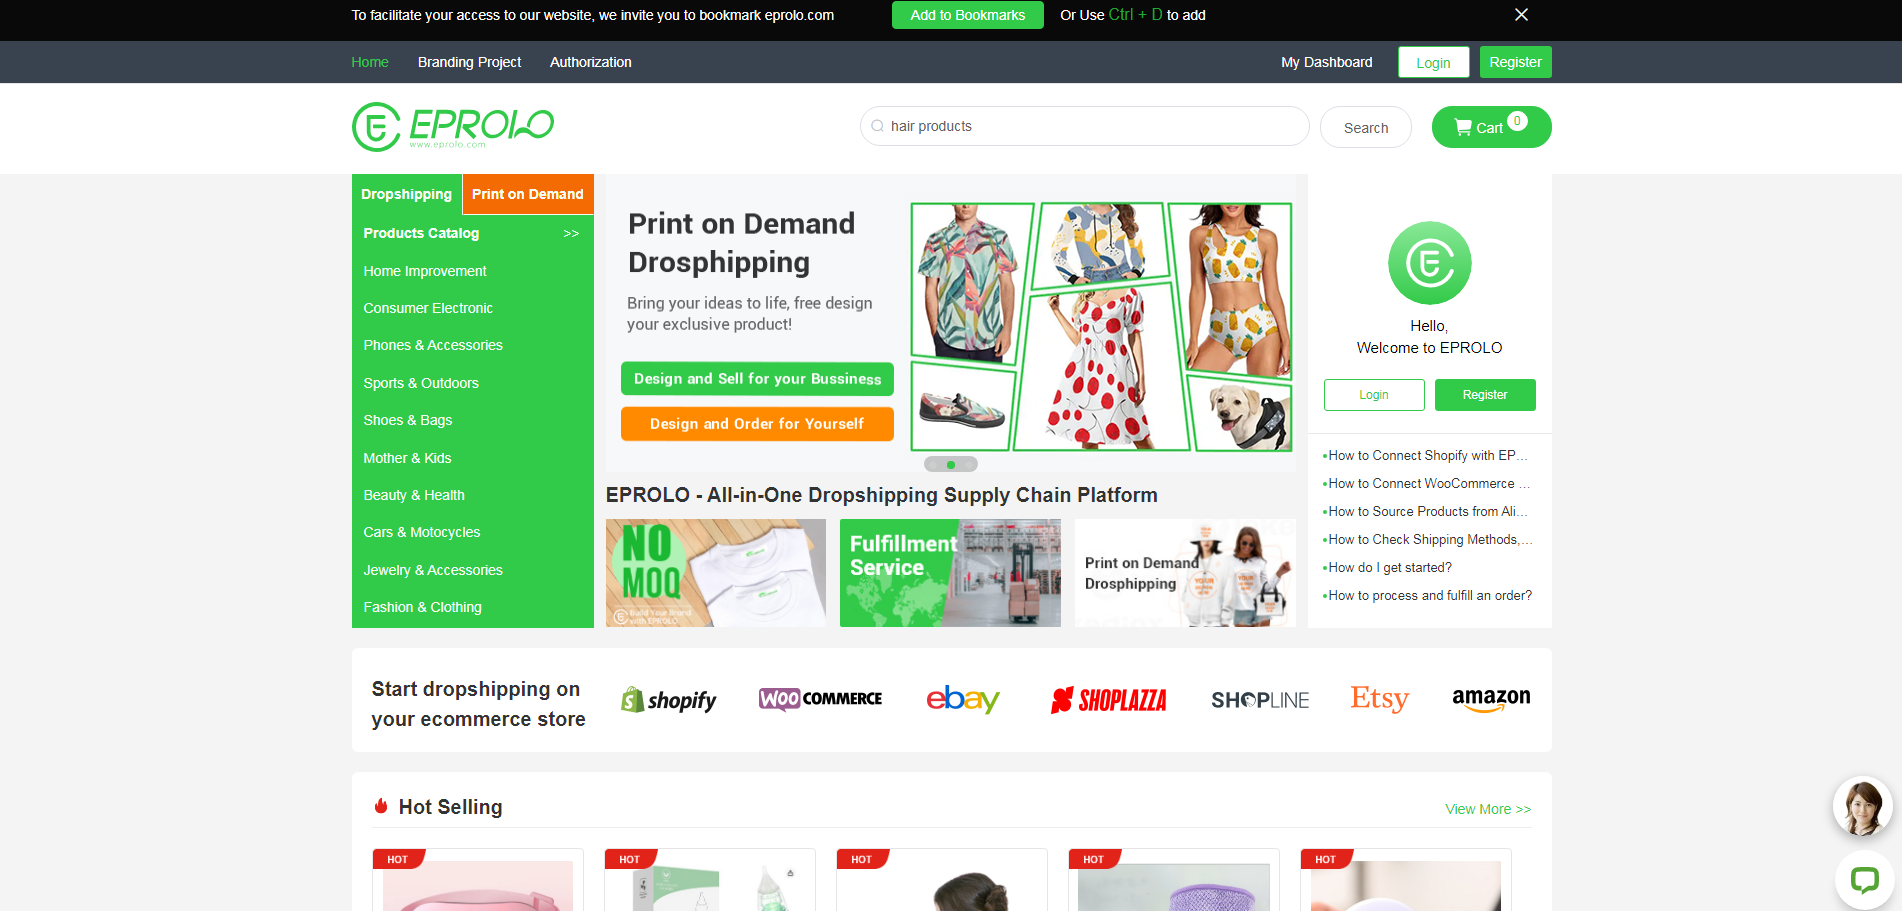 8 Best Hair Salon Dropshipping Suppliers 8: EPROLO